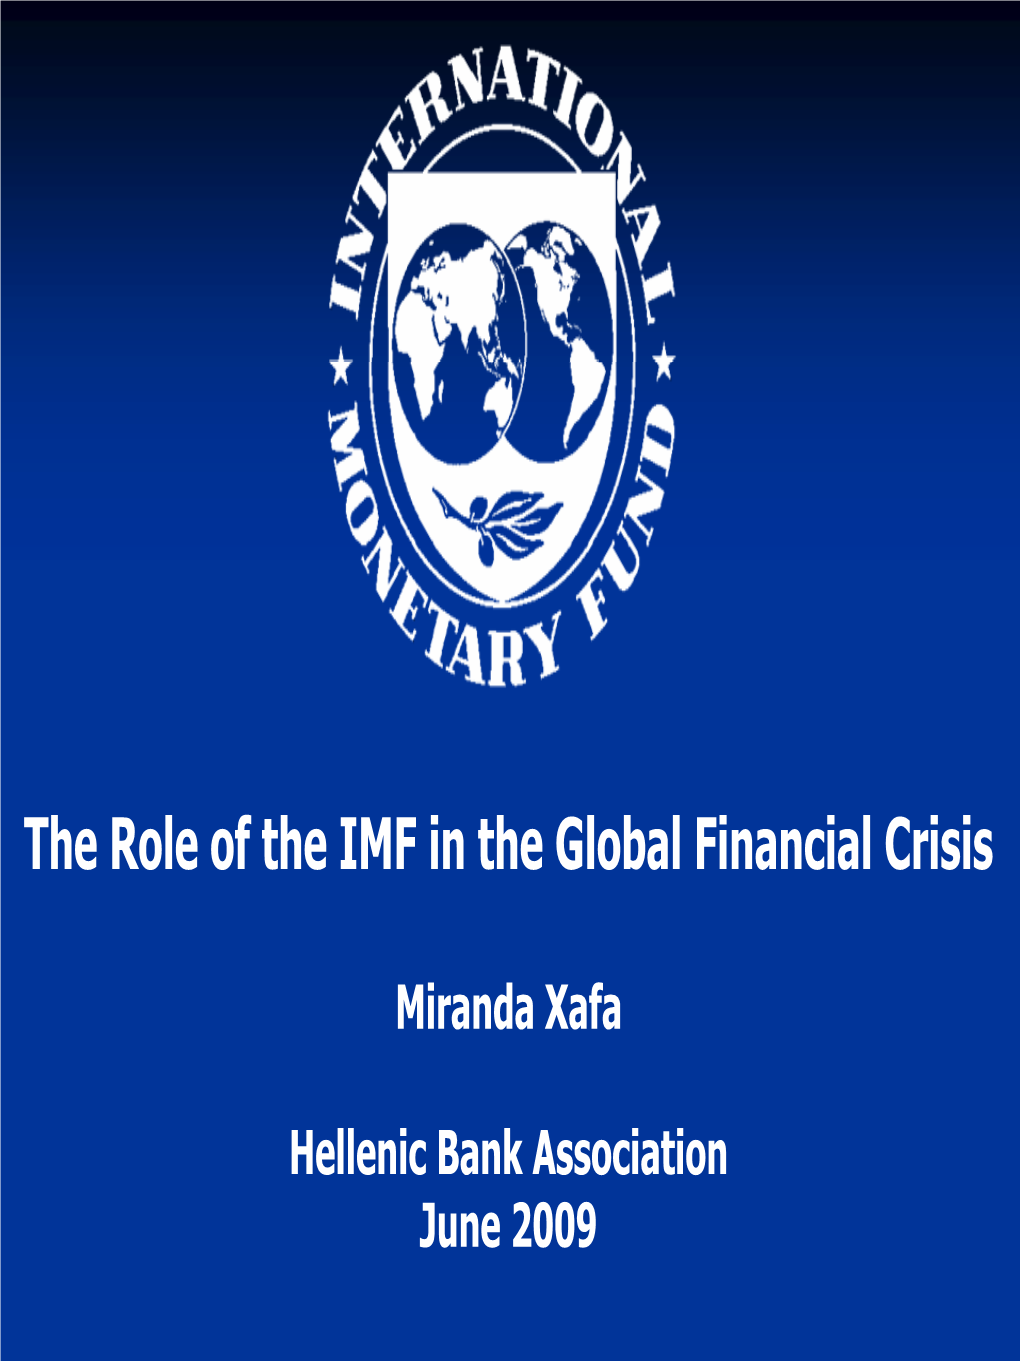 The Role of the IMF in the Global Financial Crisis